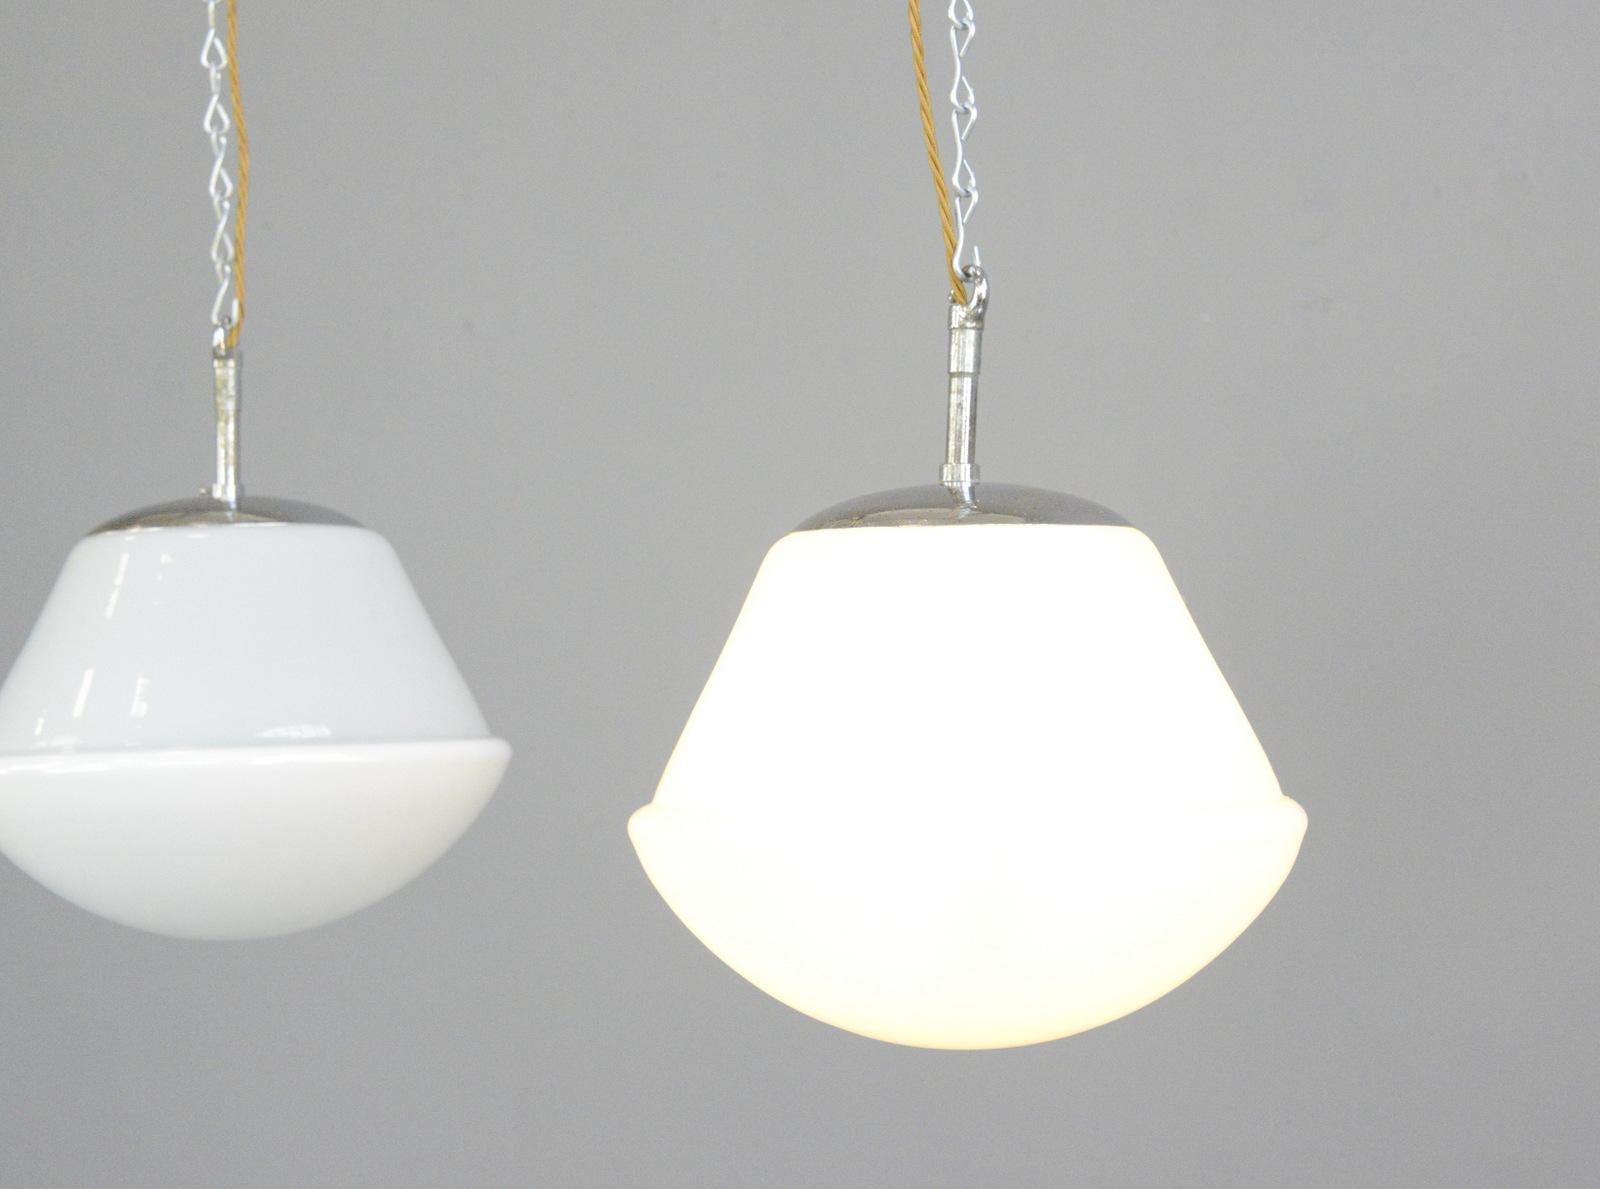 Kandem model 755 P40 opaline pendant lights, circa 1930s

- Price is for the pair
- Bell jar with a satin-finished upper half and a thickly opal-lined lower half
- Chrome tops
- Takes E27 fitting bulbs
- Marked 